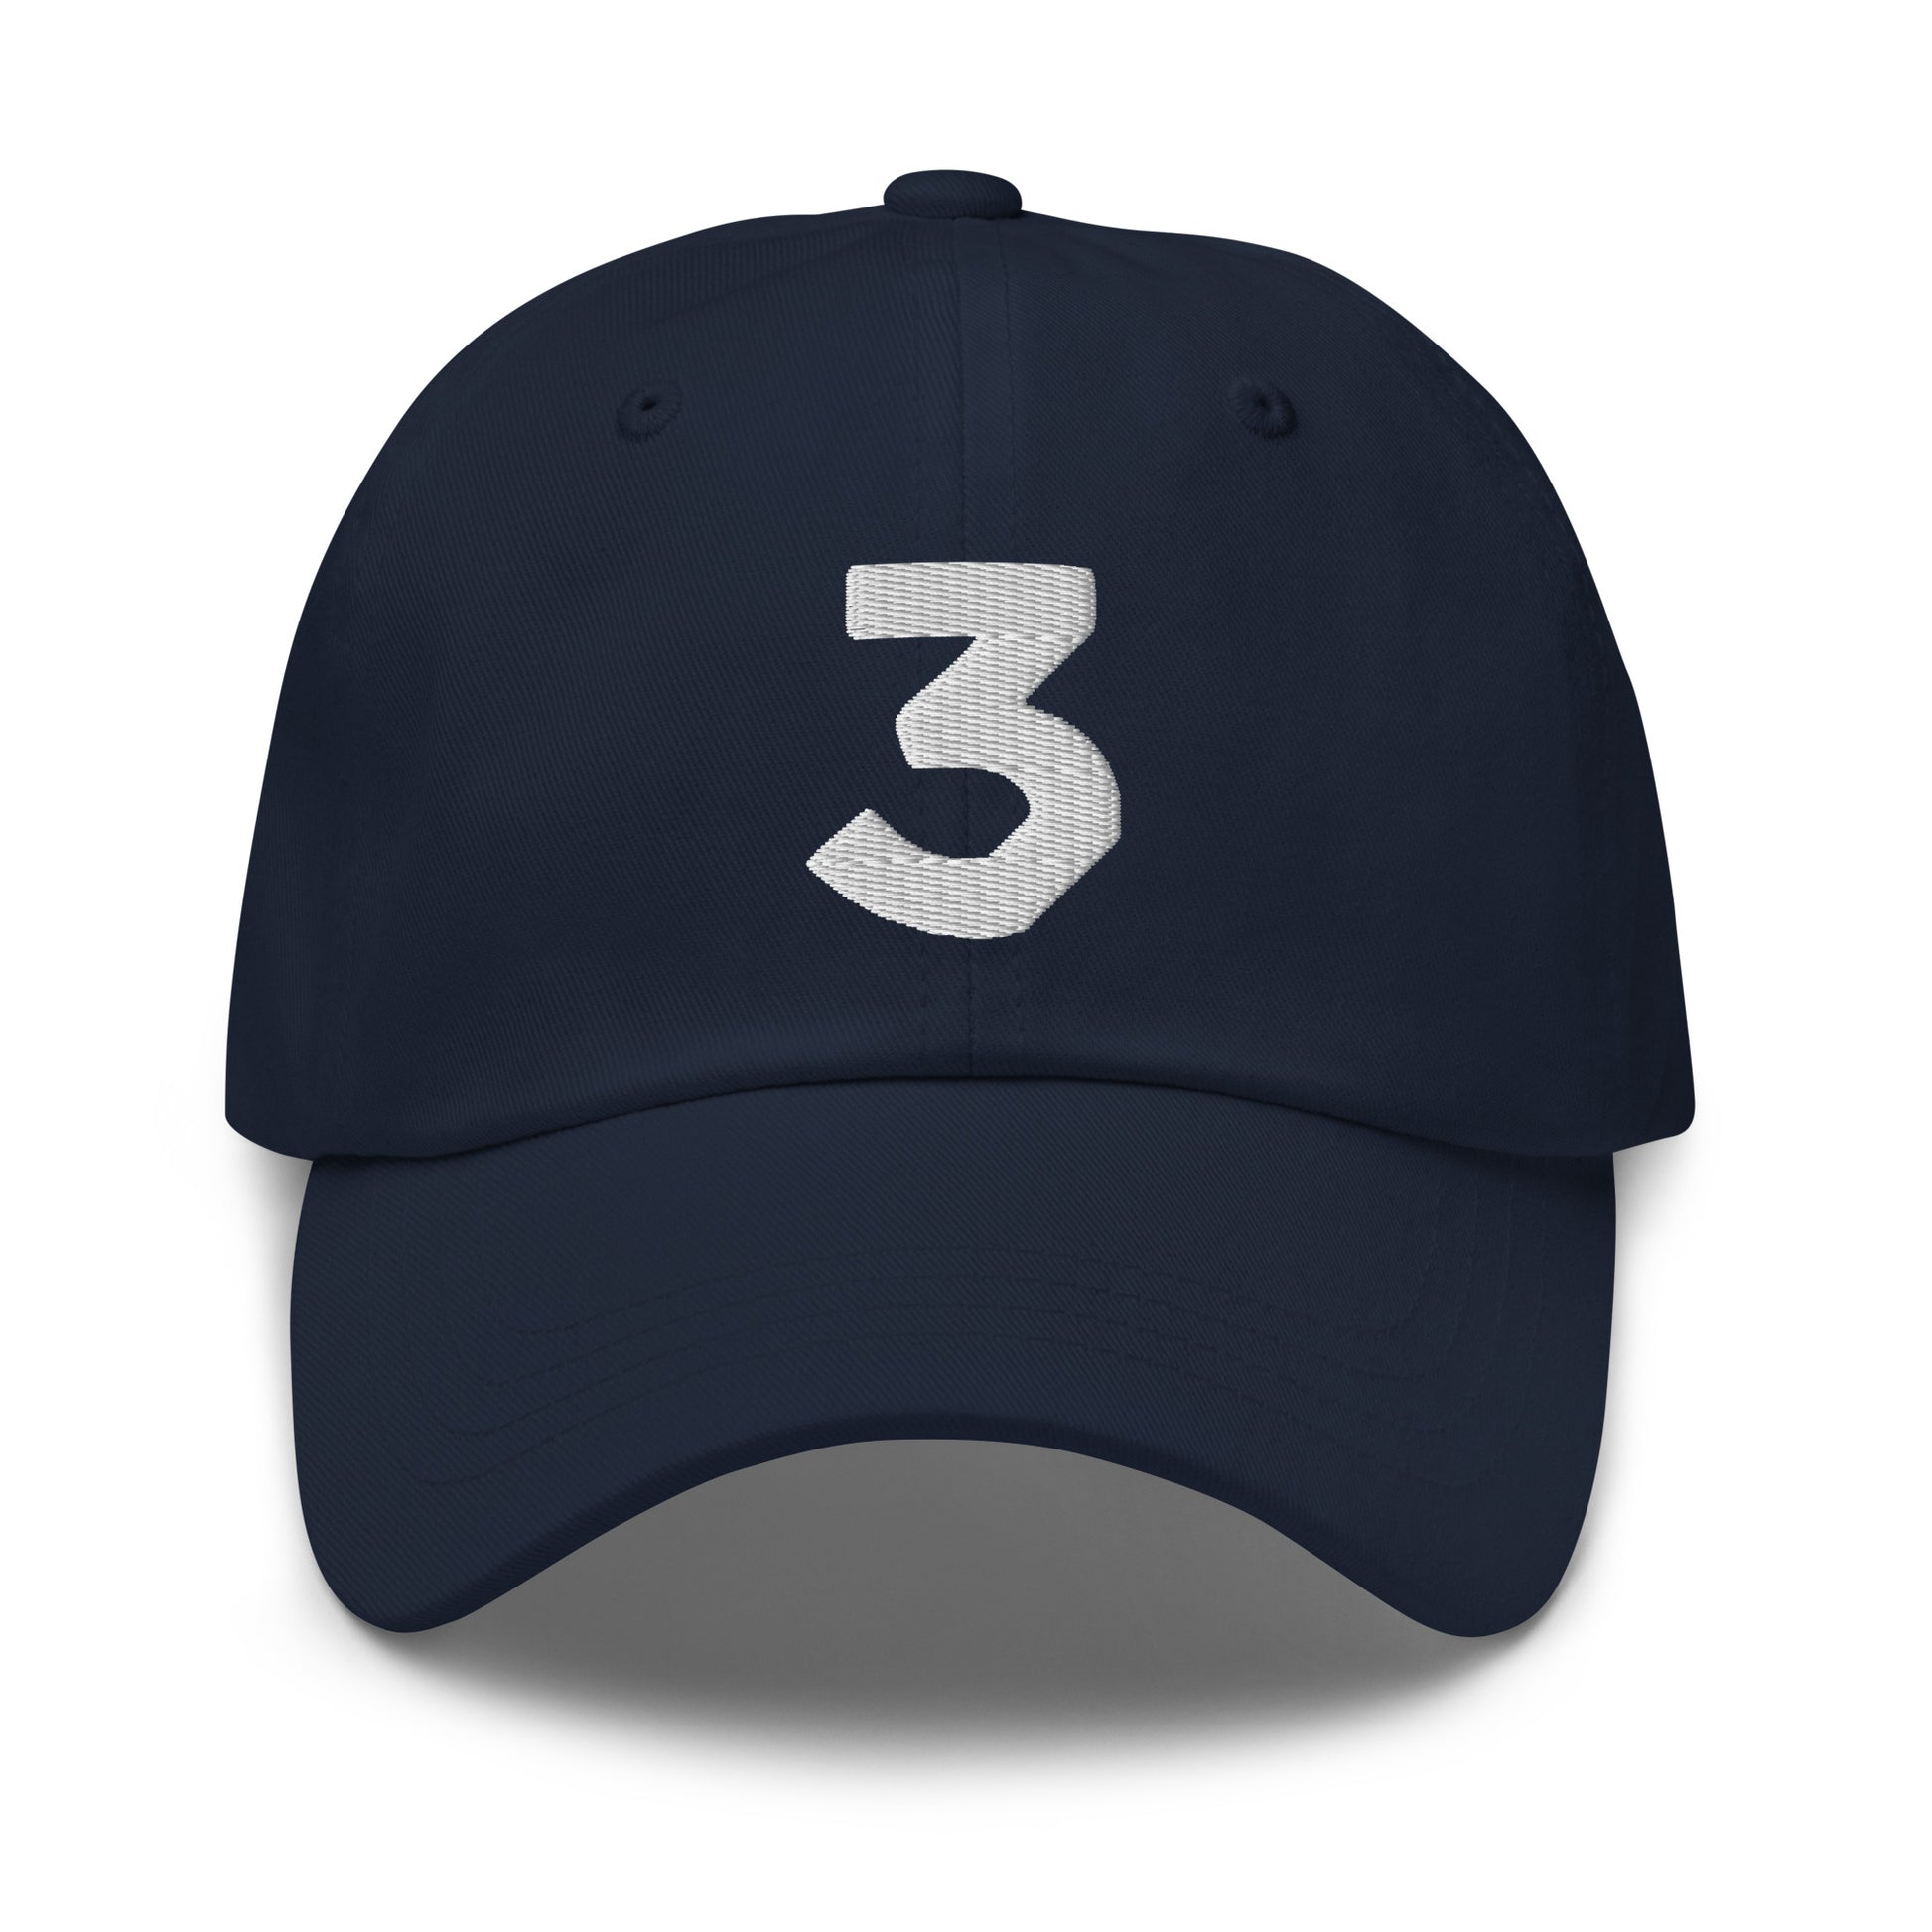 Chance The Rapper 3 Hat / 3 Hat / Chance The Rapper 3 Dad Hat White